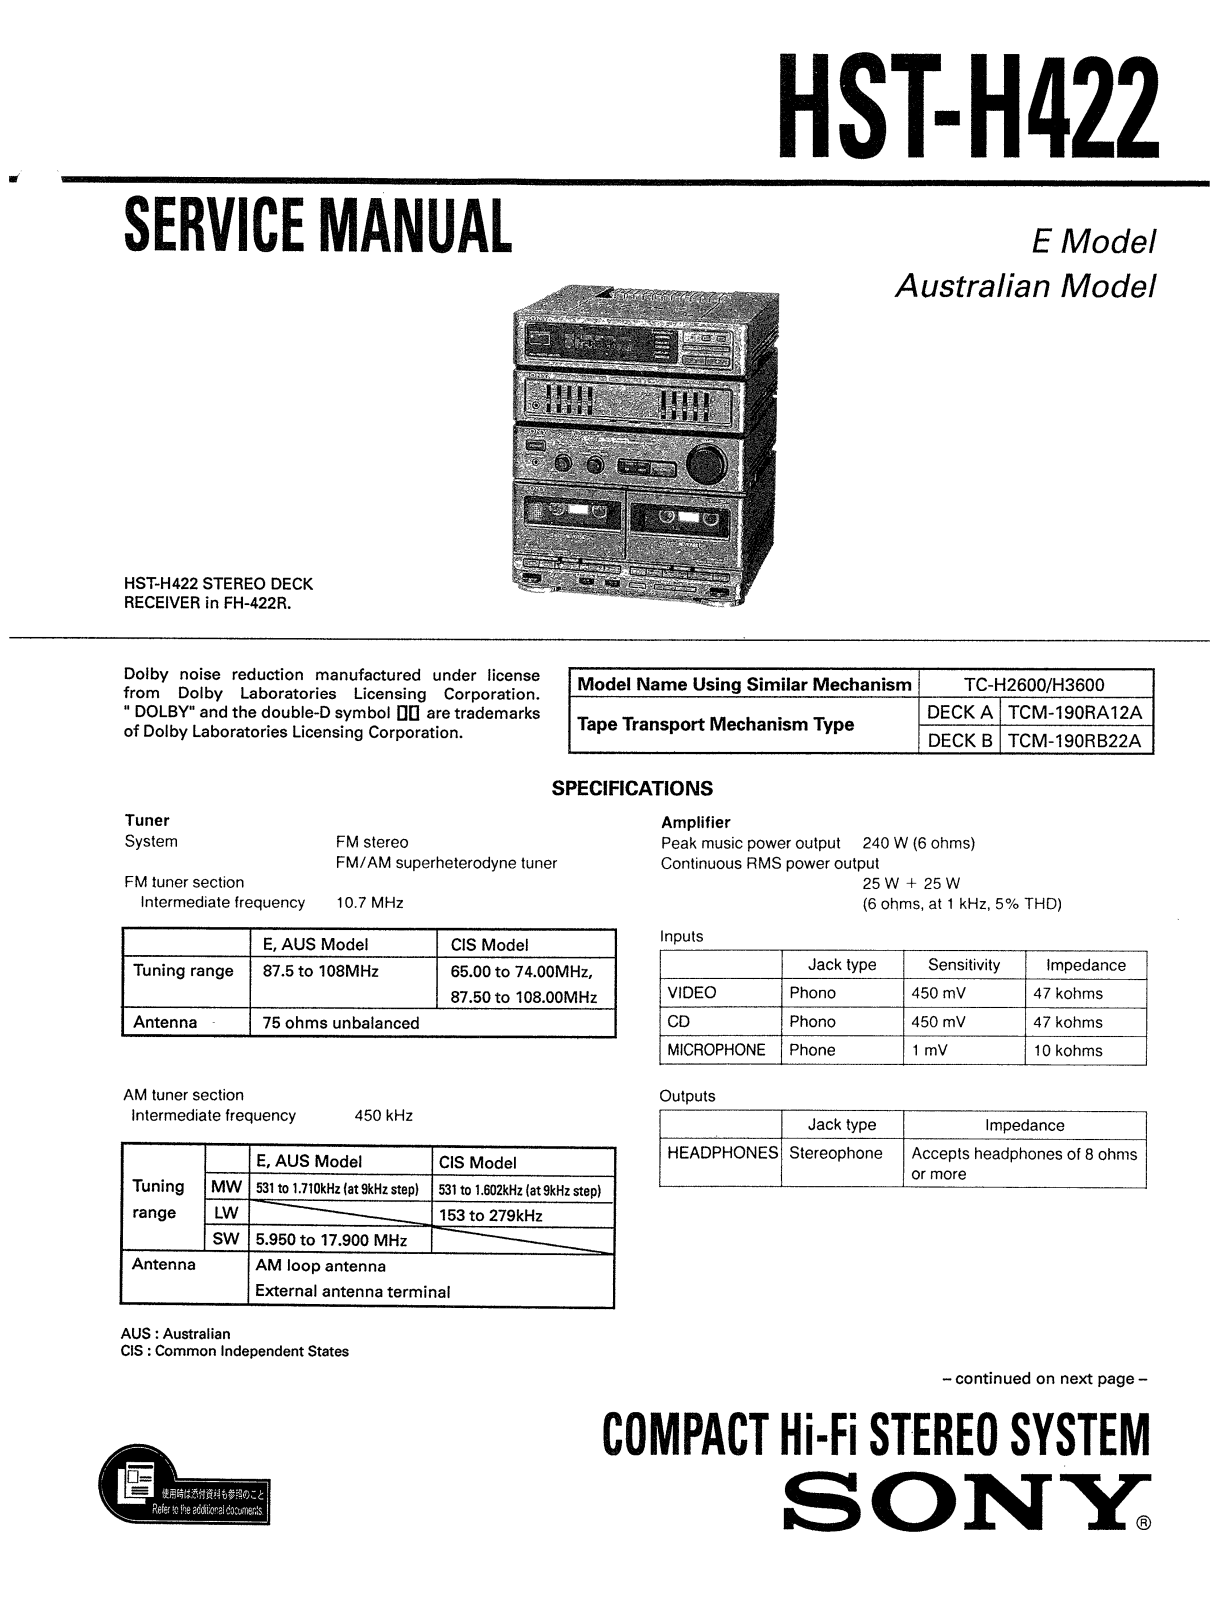 Sony HSTH-422 Service manual